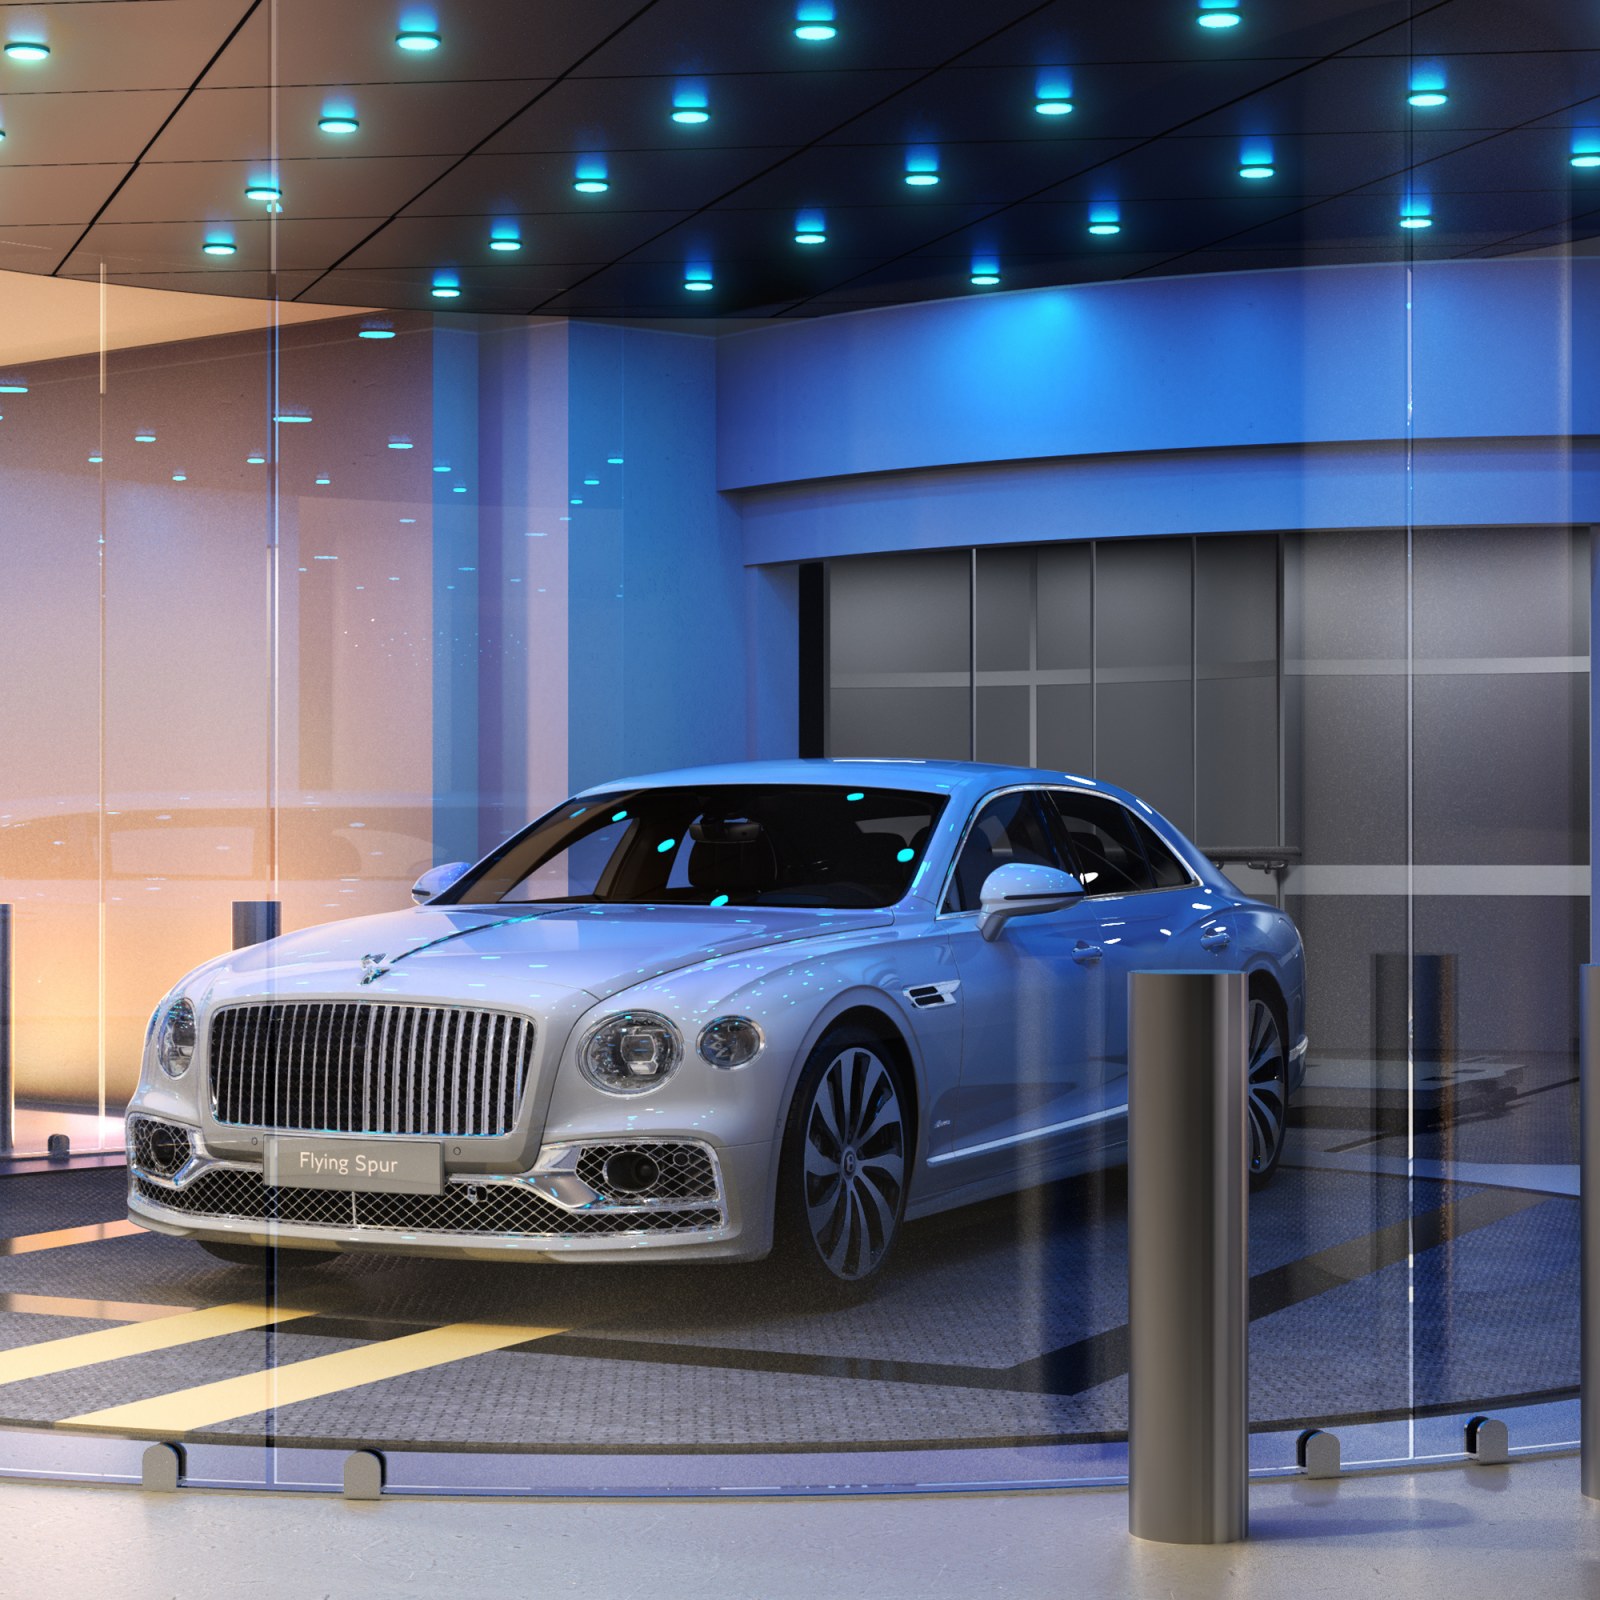 Bentley Residences Offer Luxe Vehicle Amenities in Million-Dollar Apartments